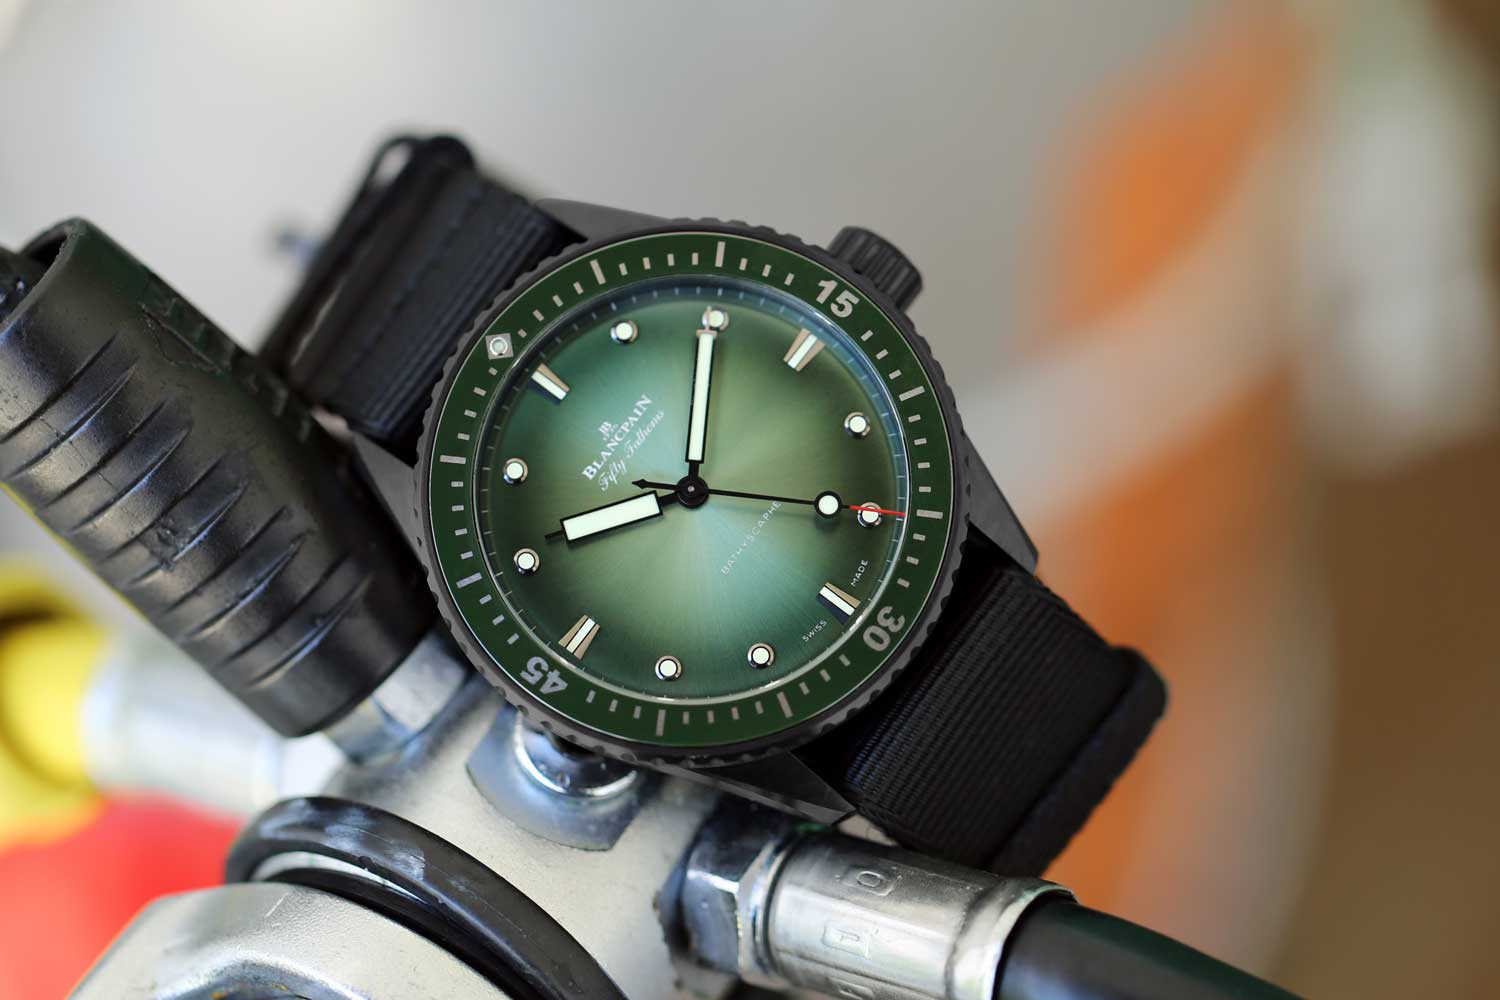 The Bathyscaphe Mokarran Limited Edition with the extraordinarily good-looking green dial, limited to 50 pieces